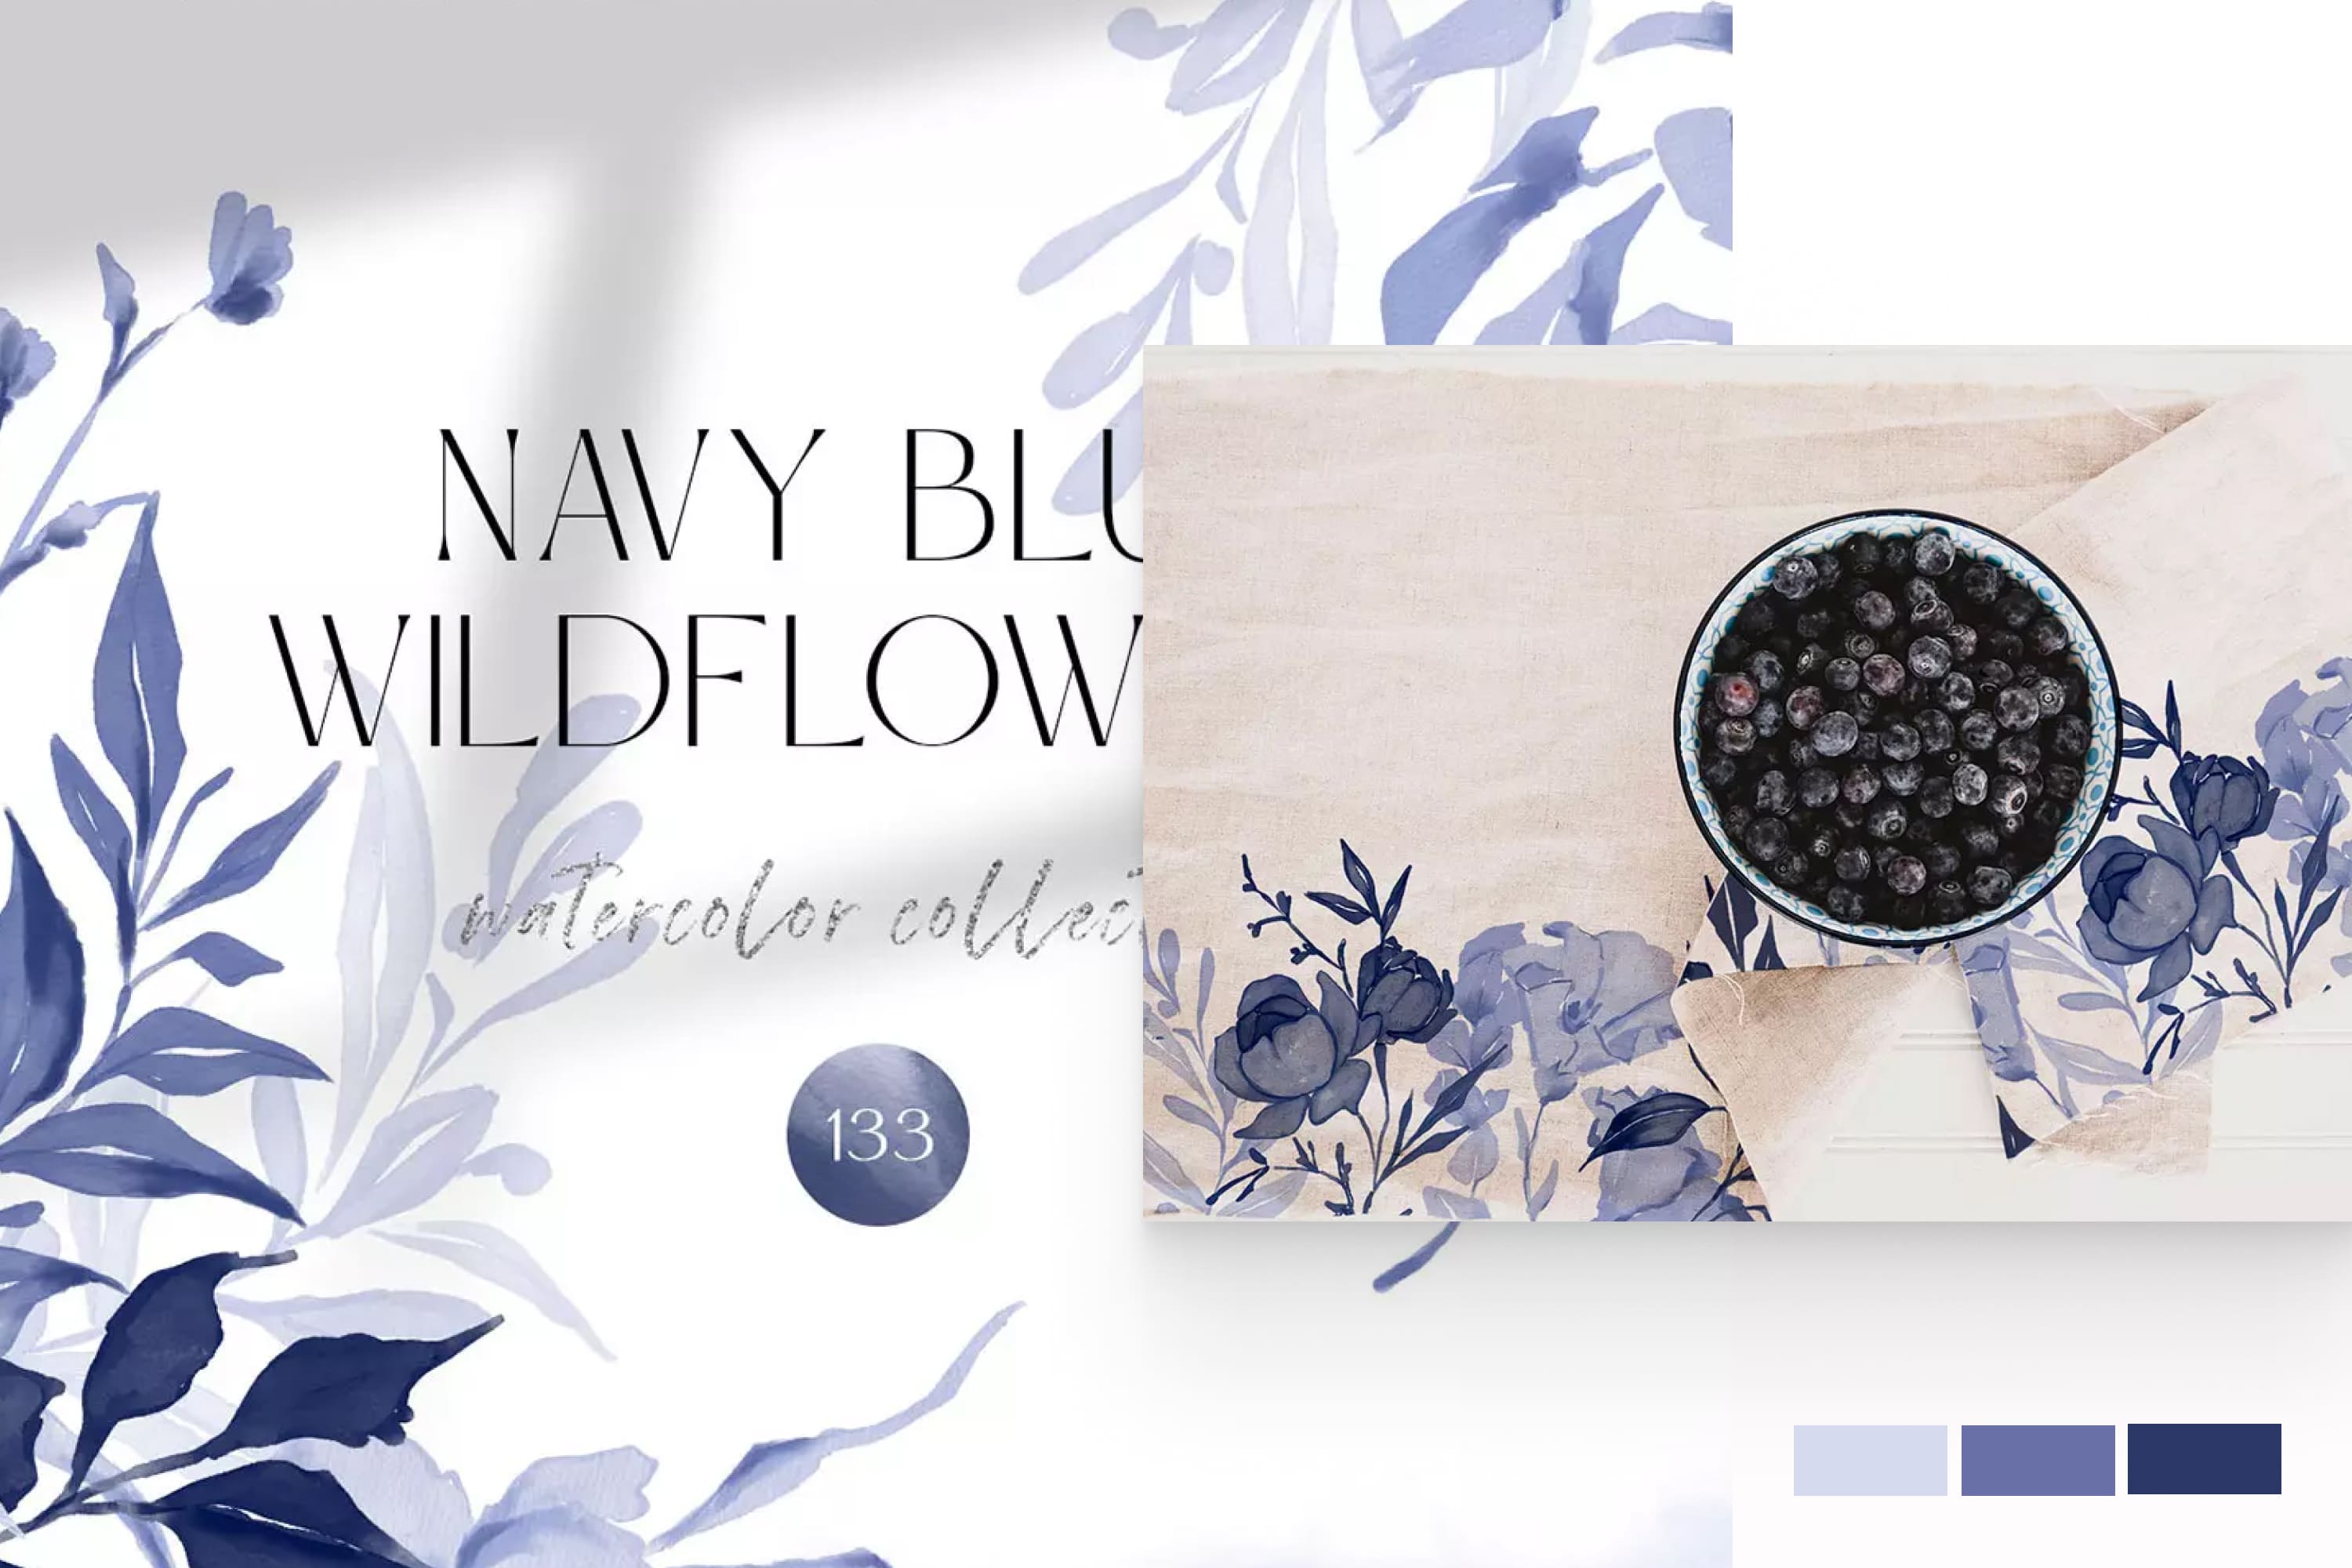 Watercolor painted blue flowers and a bowl of blueberries.